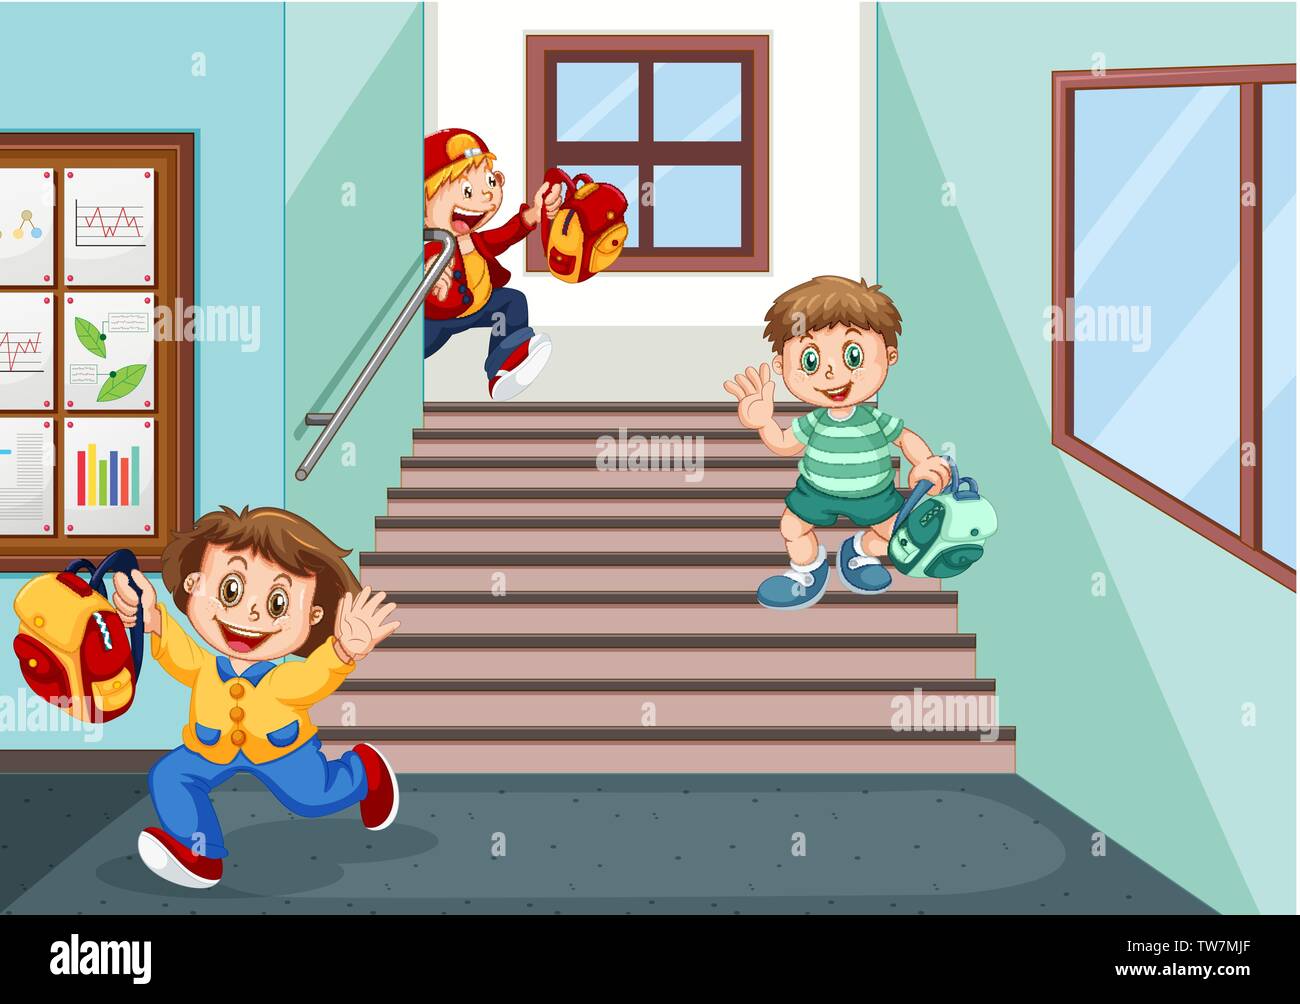 Student goinf home after school illustration Stock Vector